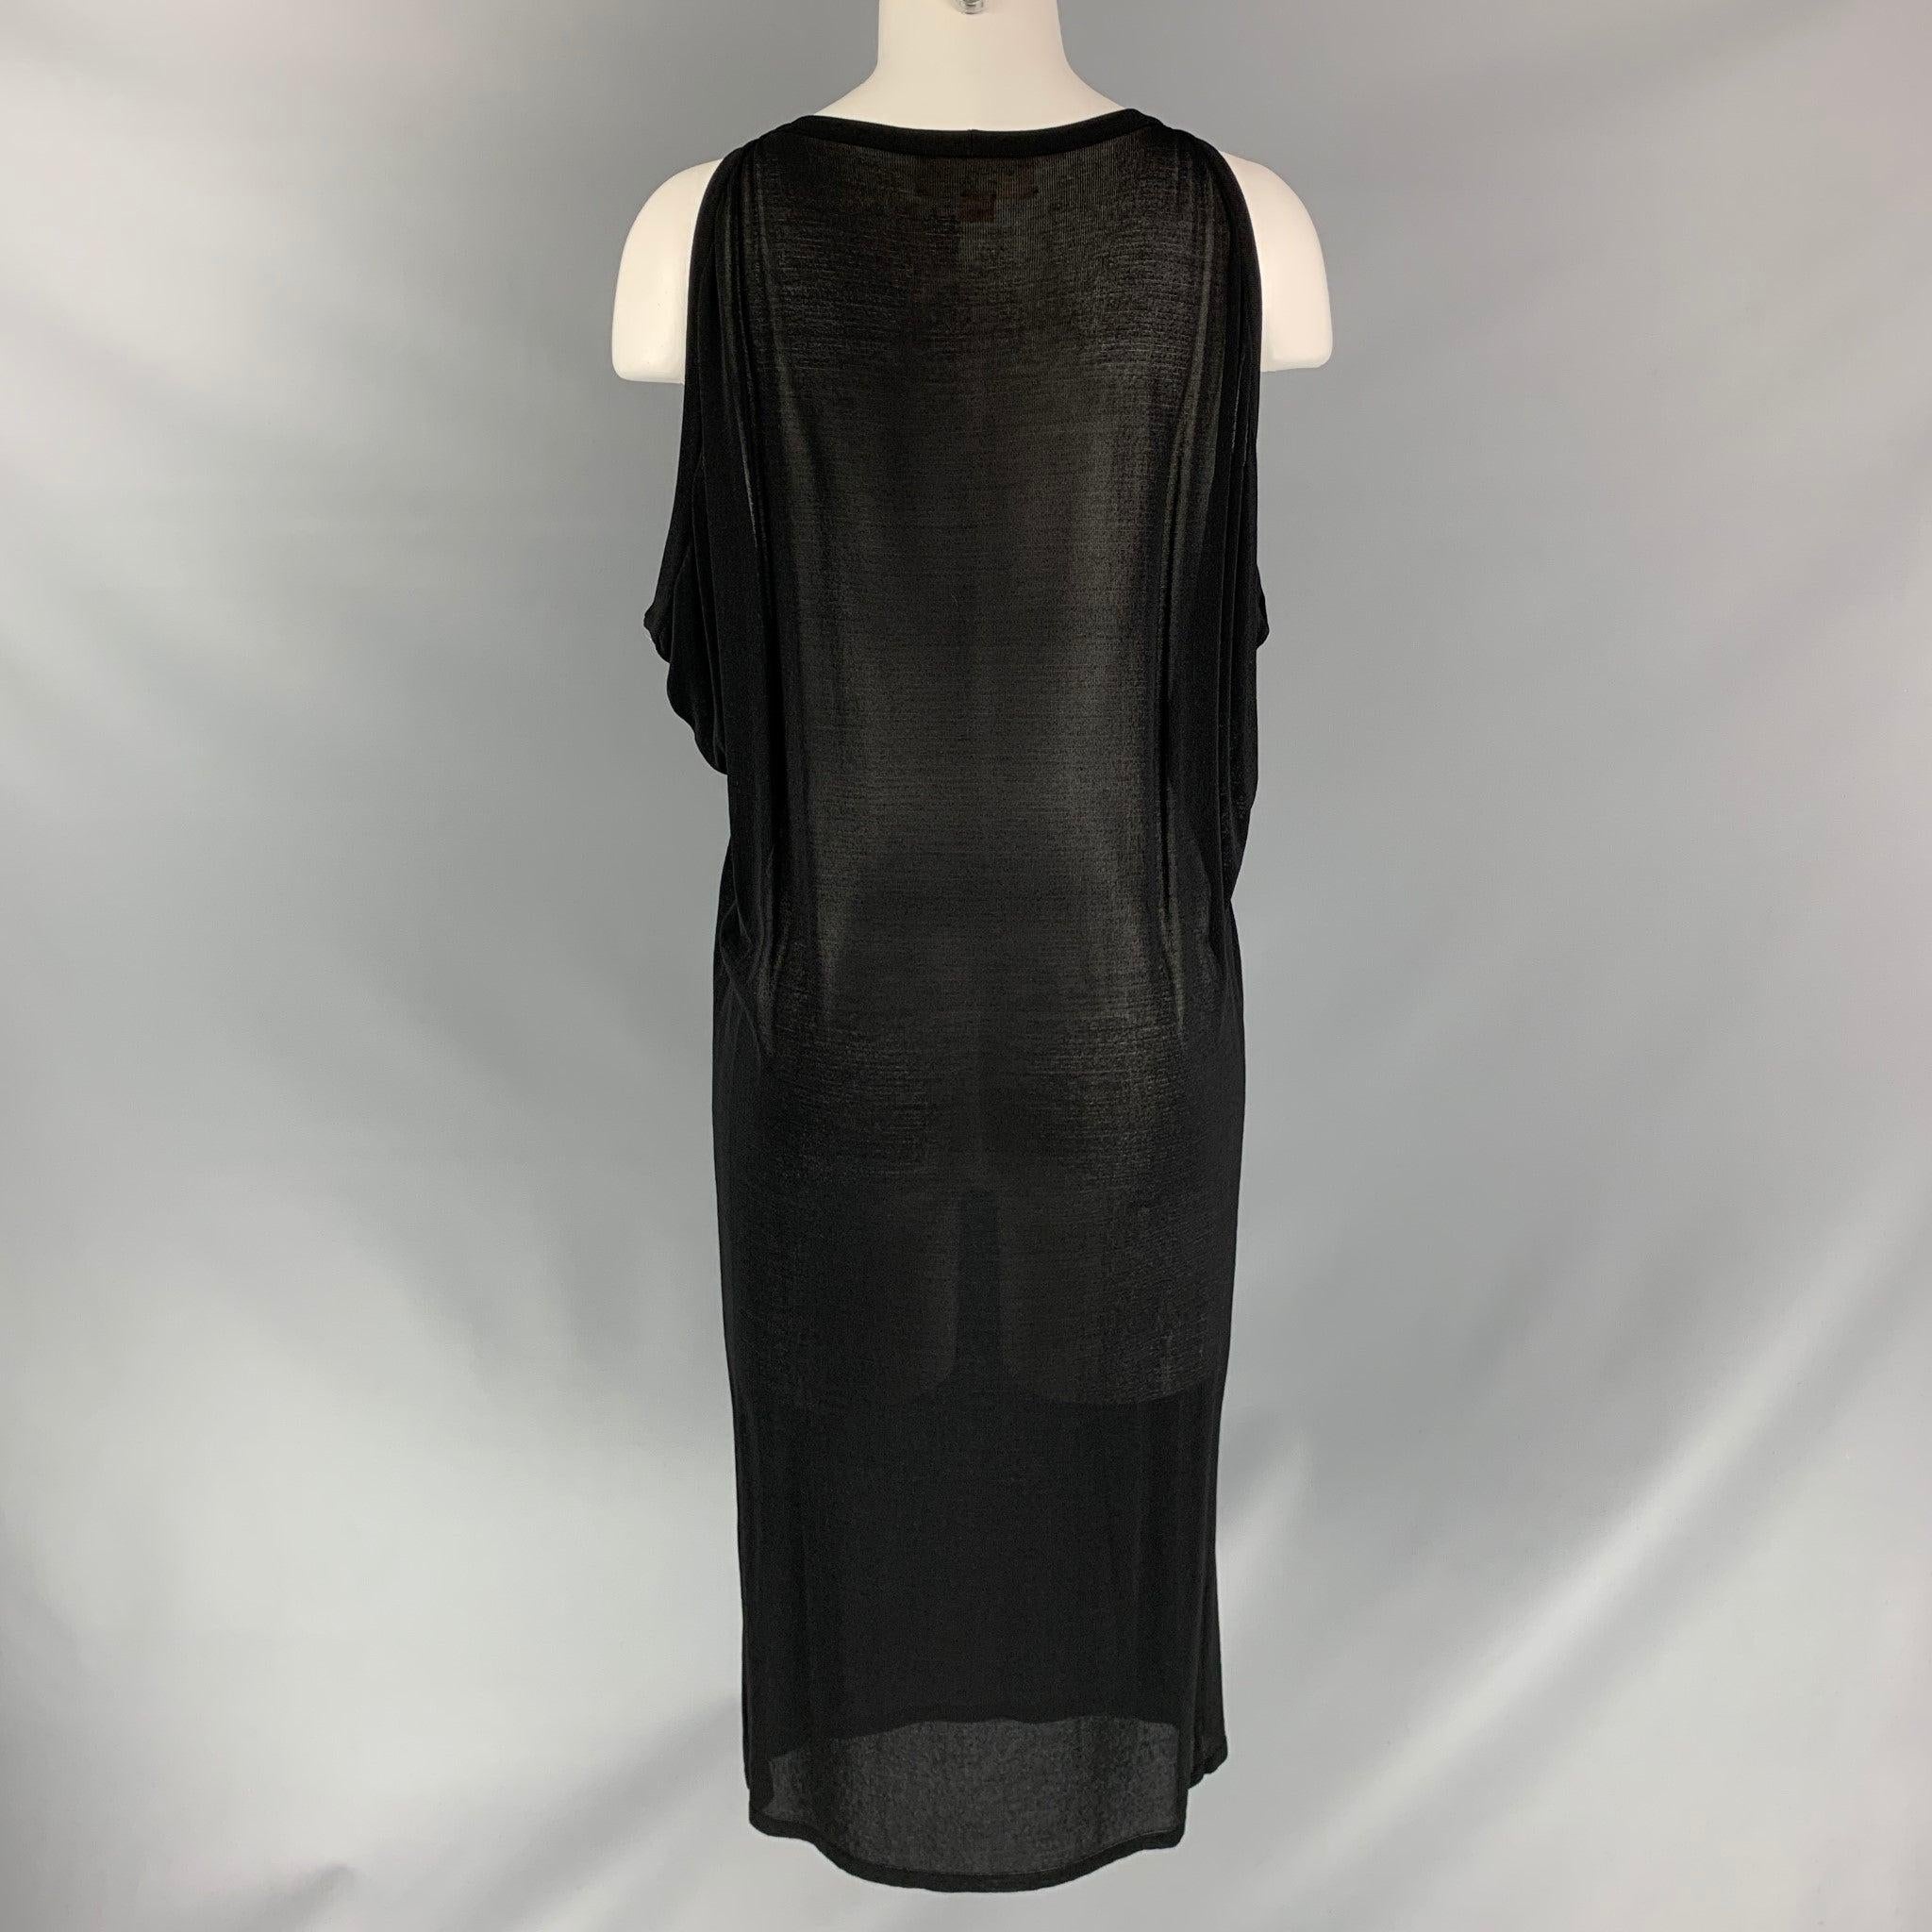 GIAMBATTISTA VALLI See Through Size S Black Viscose Blend Dress In Good Condition For Sale In San Francisco, CA